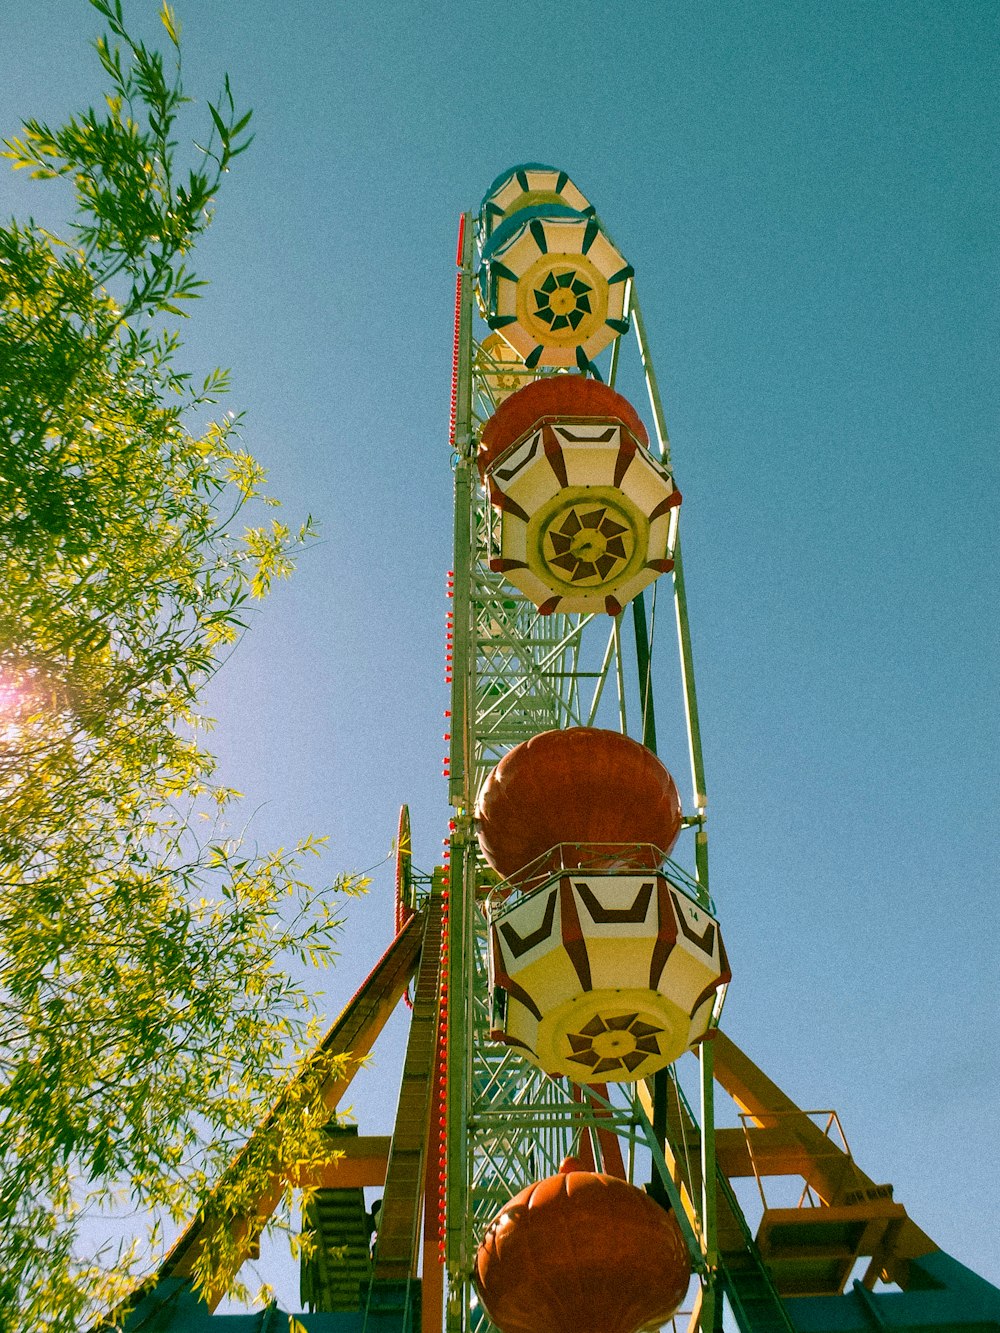 low-angle photography of green ferris wheel